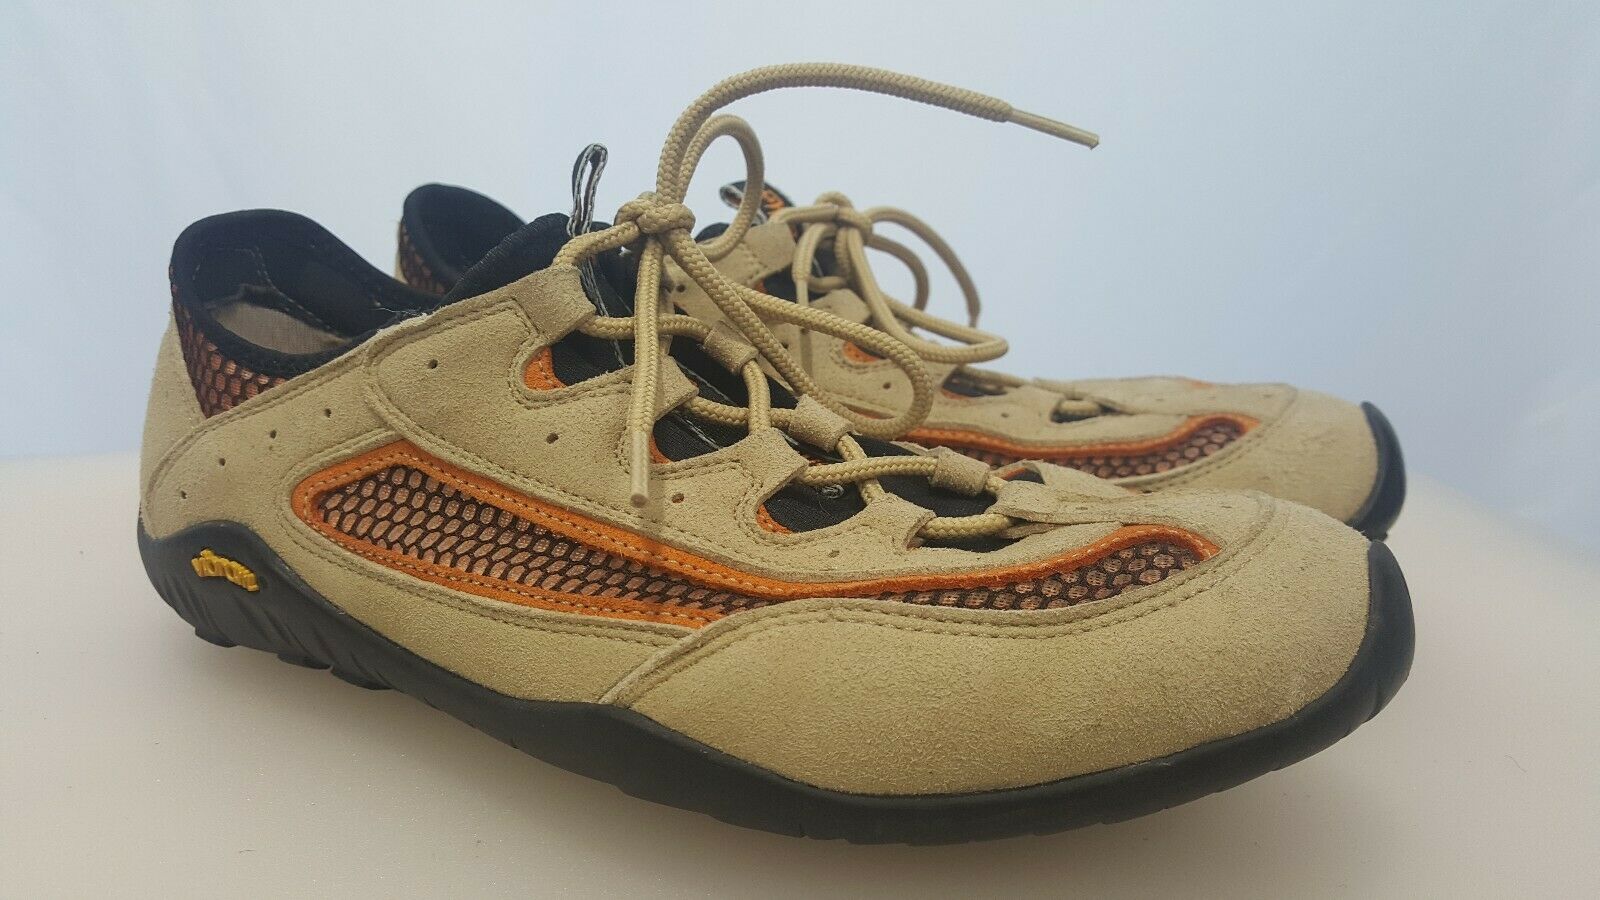 Lomer Made in Italy Rare Trail Walking Shoes Vibram Soles size Mens 7 Women's 9